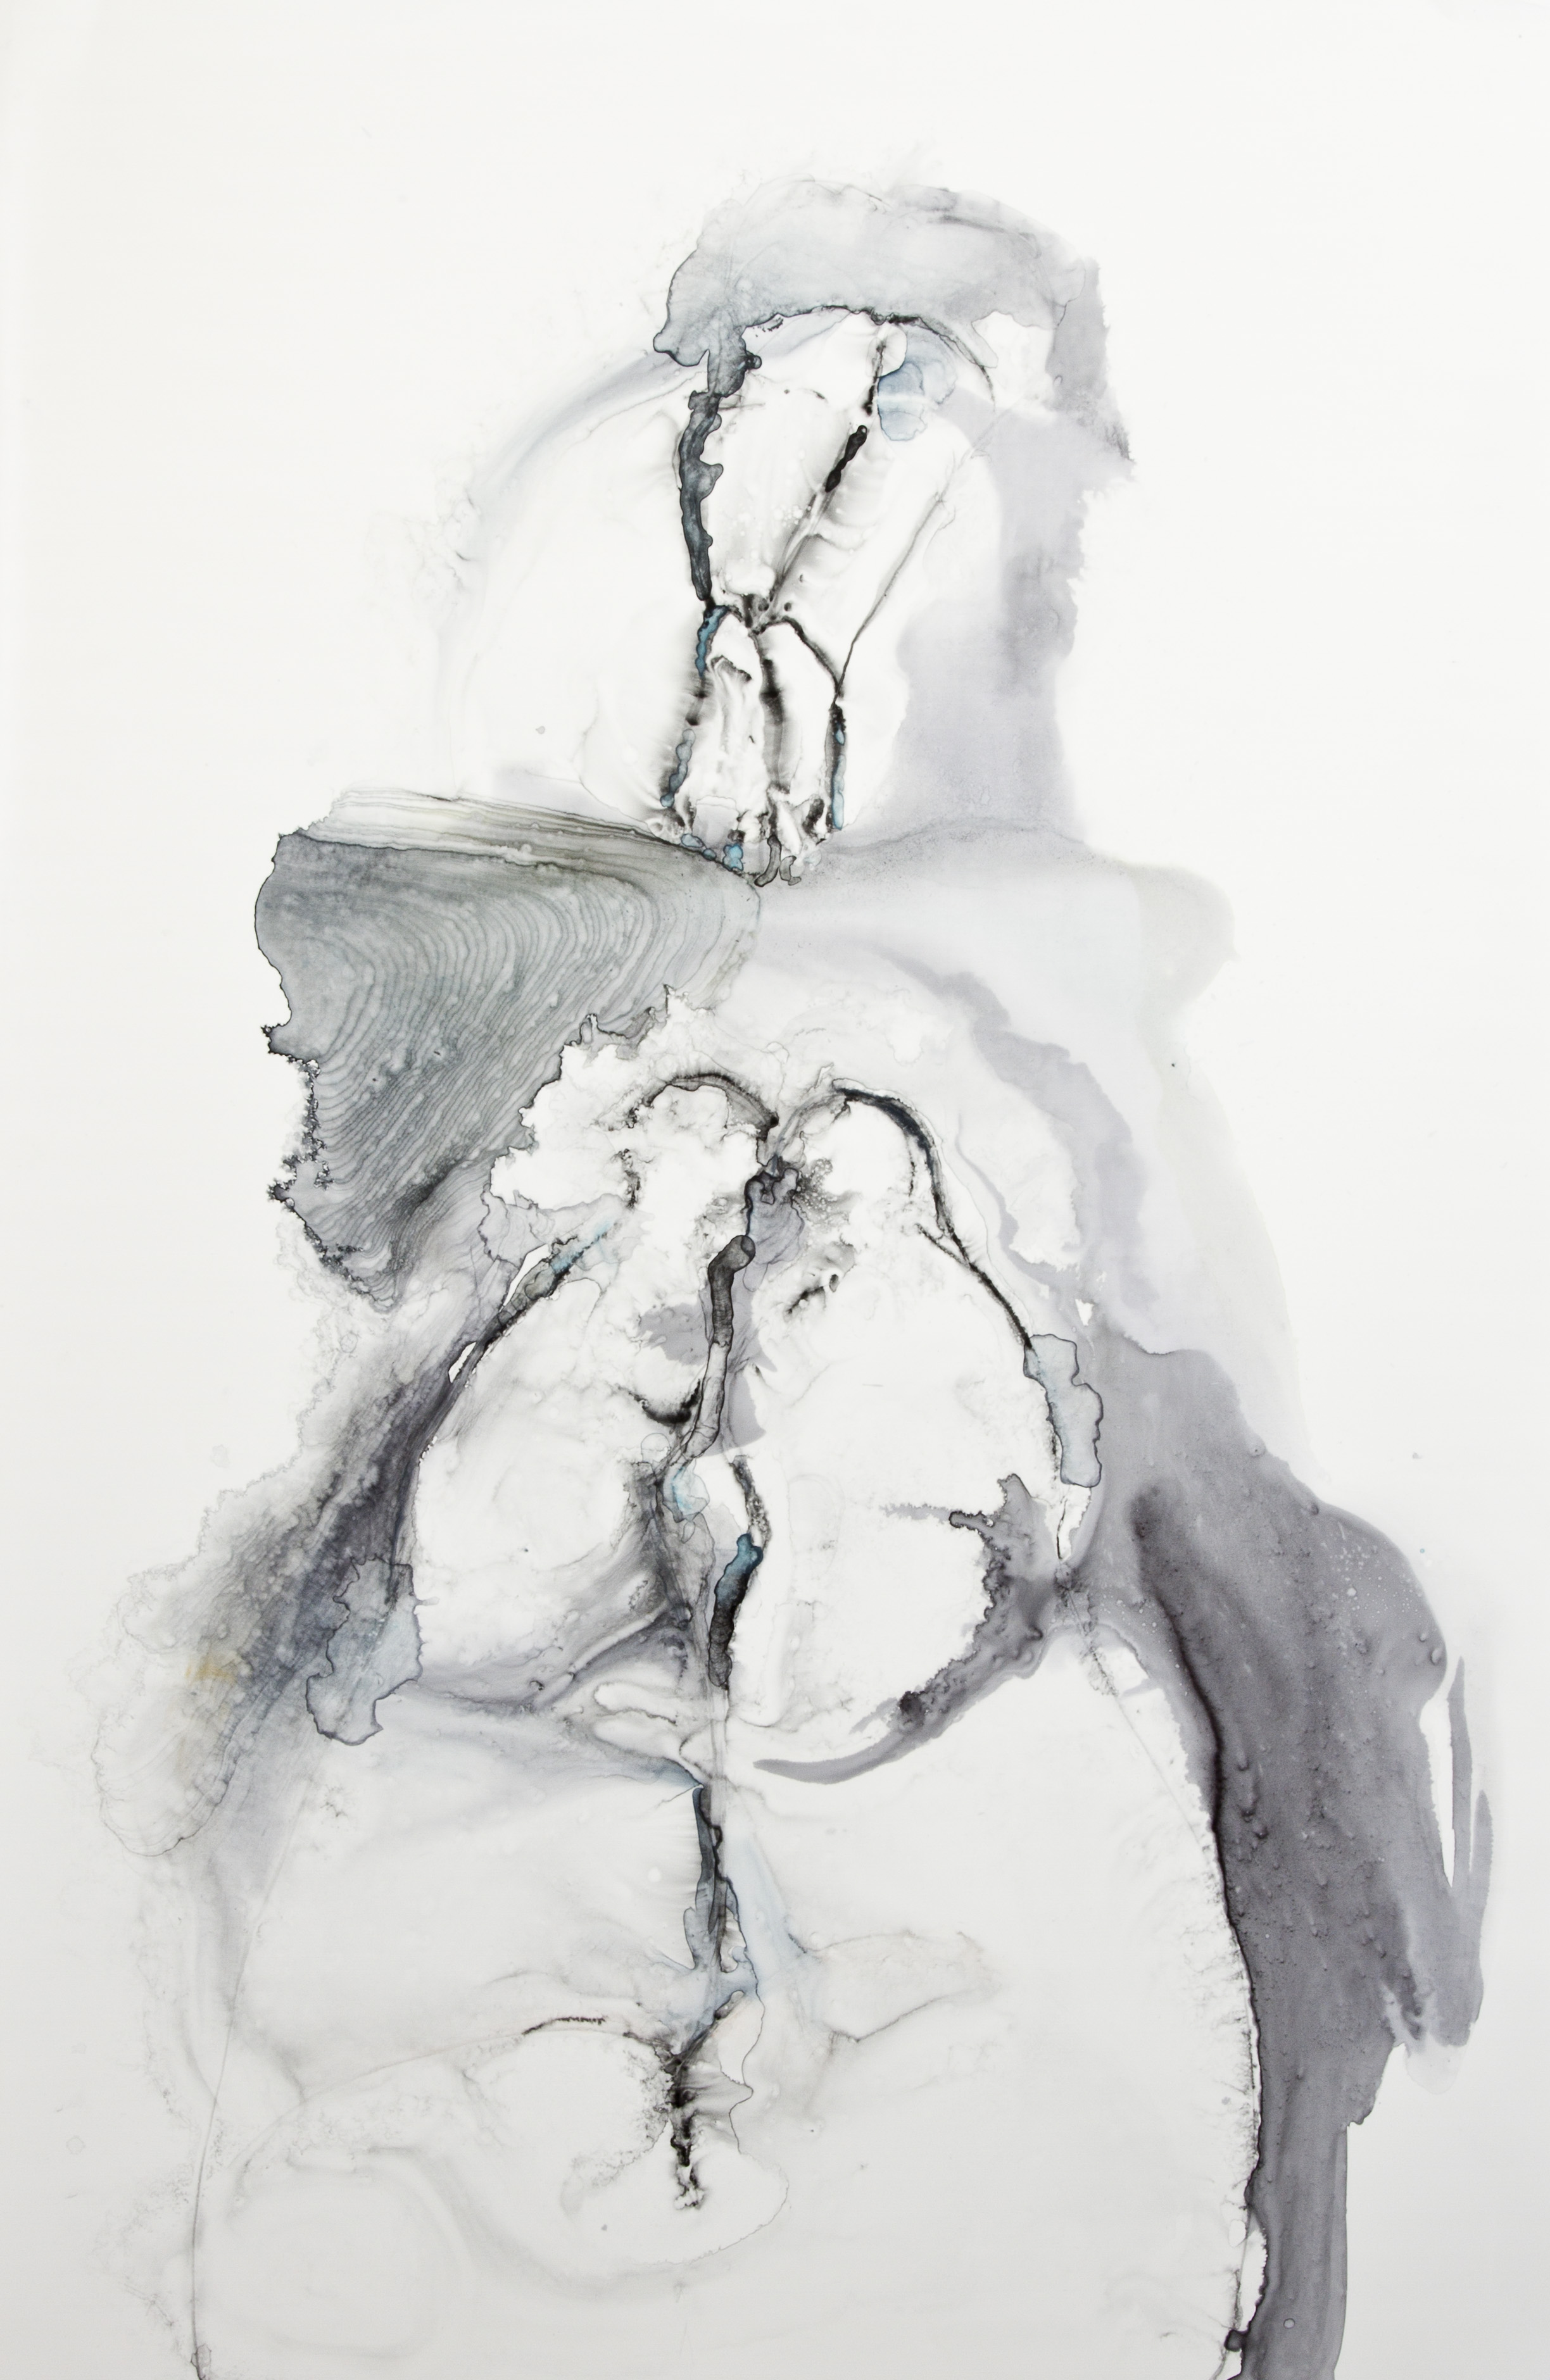 Mirroring, 2016, watercolor on polypropylene, 40x26 inches